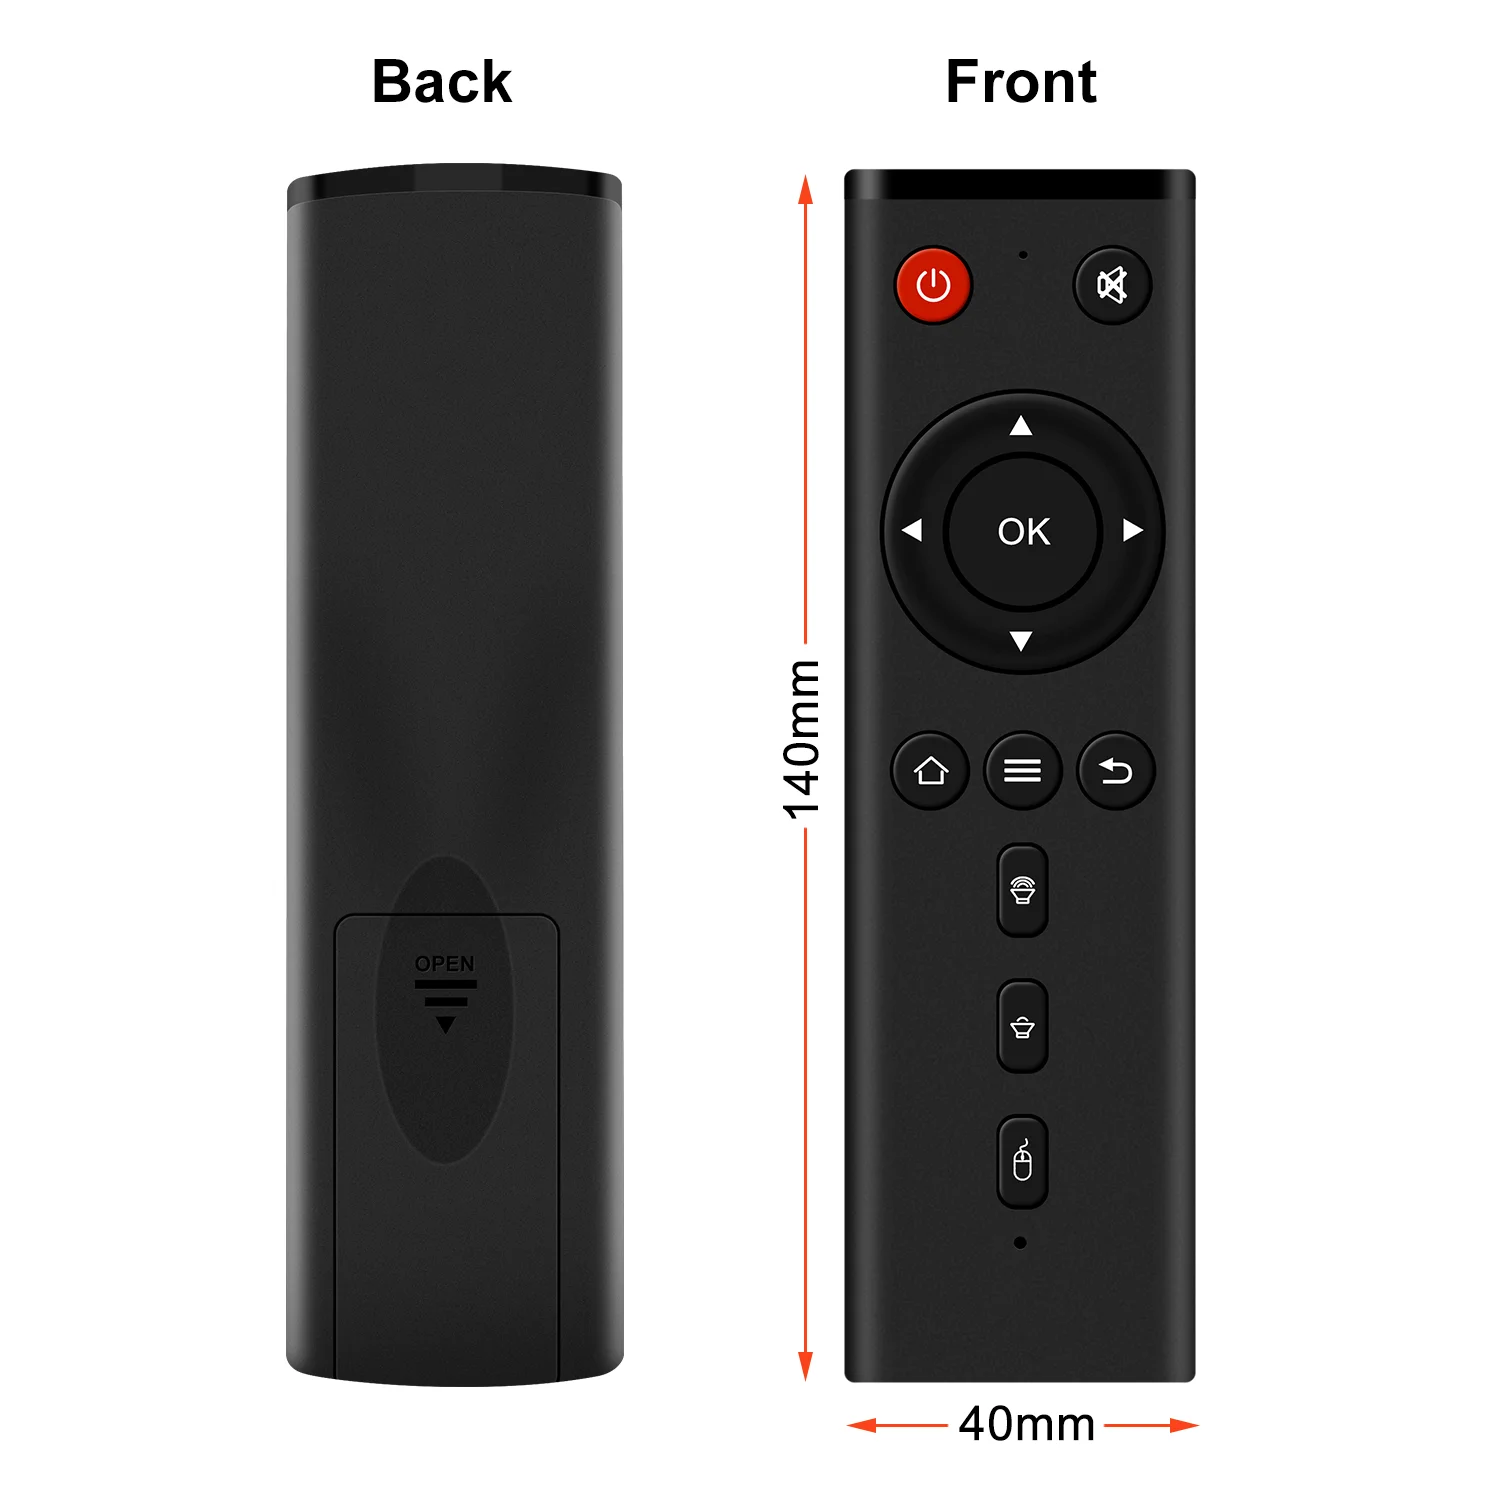 
2.4G Wireless air mouse remote control OTT DVB STB remote controller with higher glossy finish and learning function 